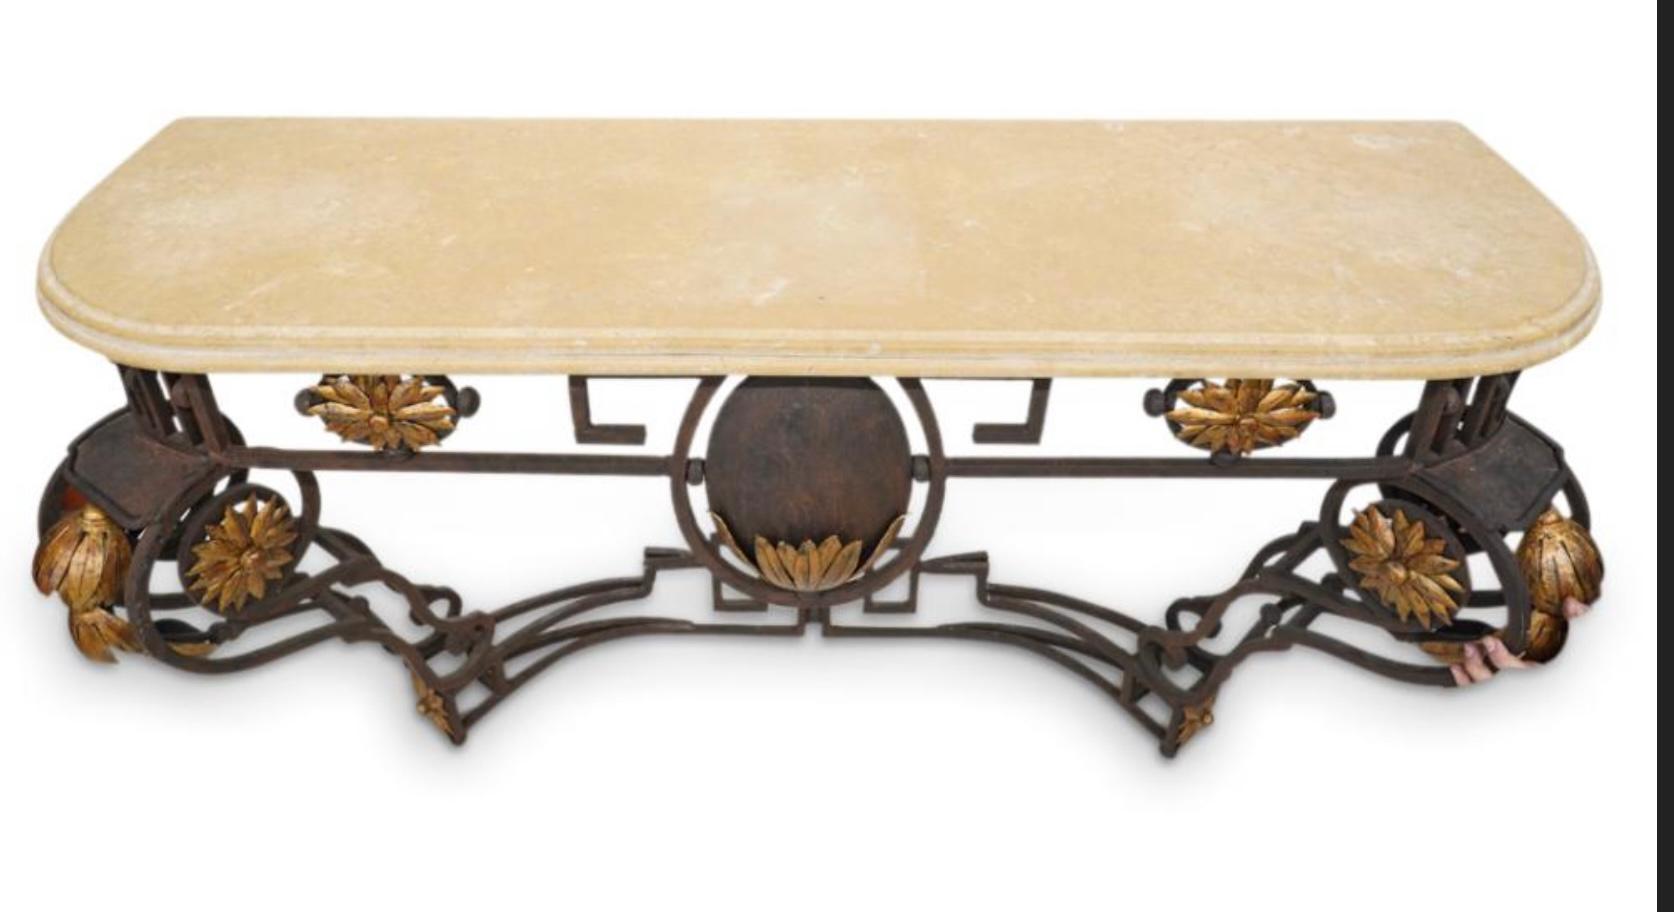 20th Century Large Scale Italian Gilt Iron Iron Wall Mounted Console Table with Stone Top For Sale